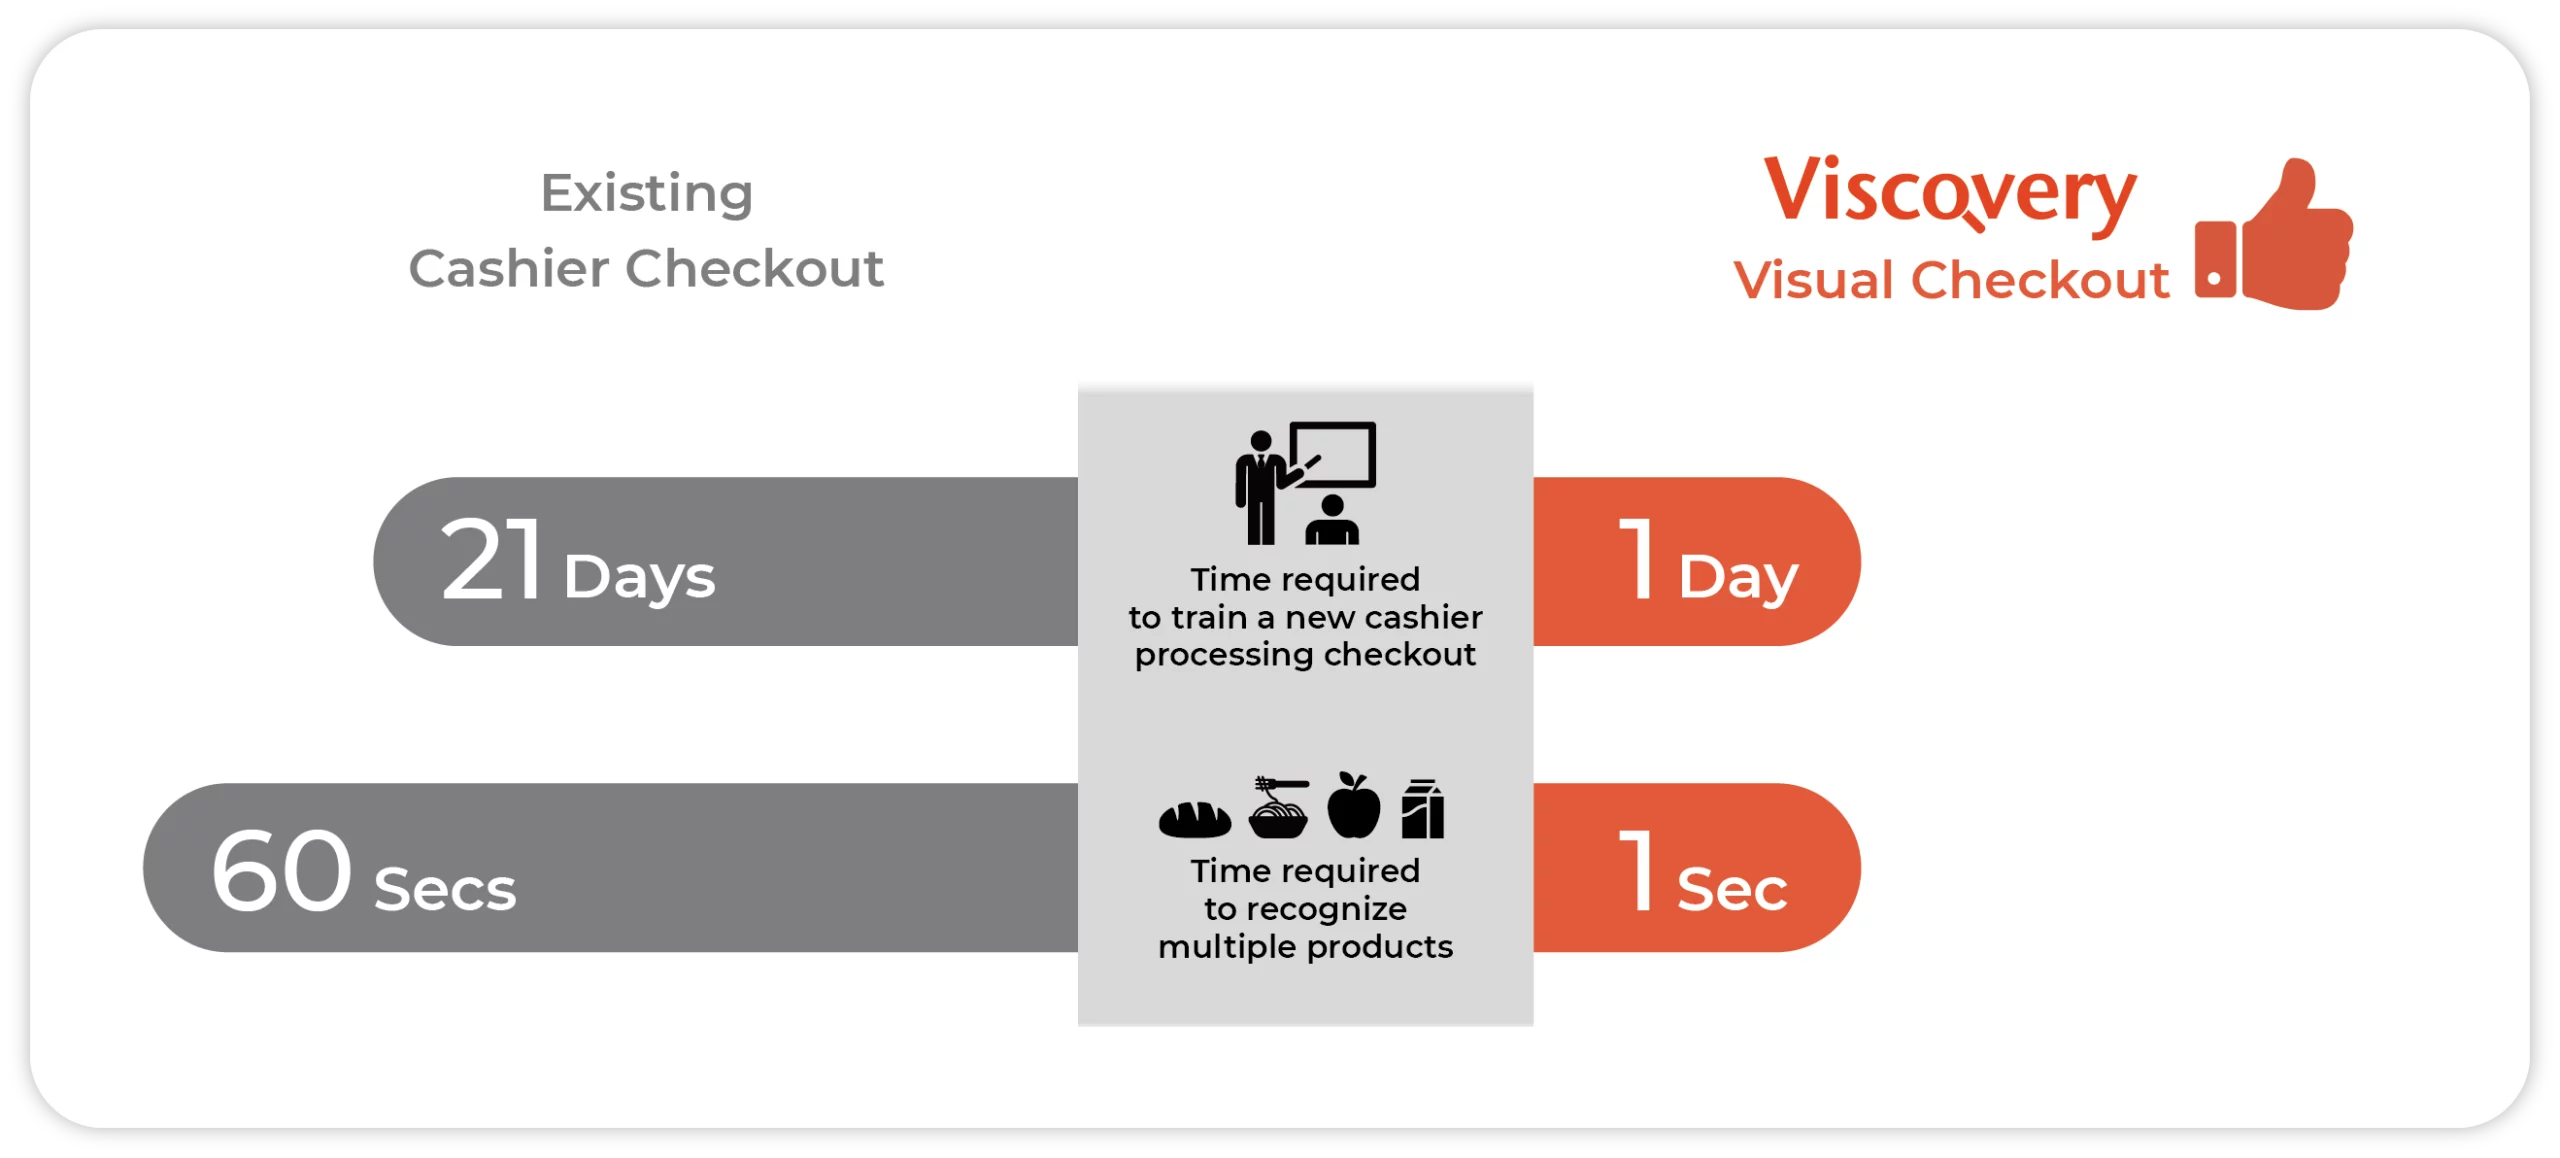 Viscovery provides a better way for retailers to streamline checkout processes by significantly reducing the time required to train a new cashier to operate checkout and identify products, from 21 days to just 1 day. It also cuts down the time needed to identify multiple products from 60 seconds to just 1 second.